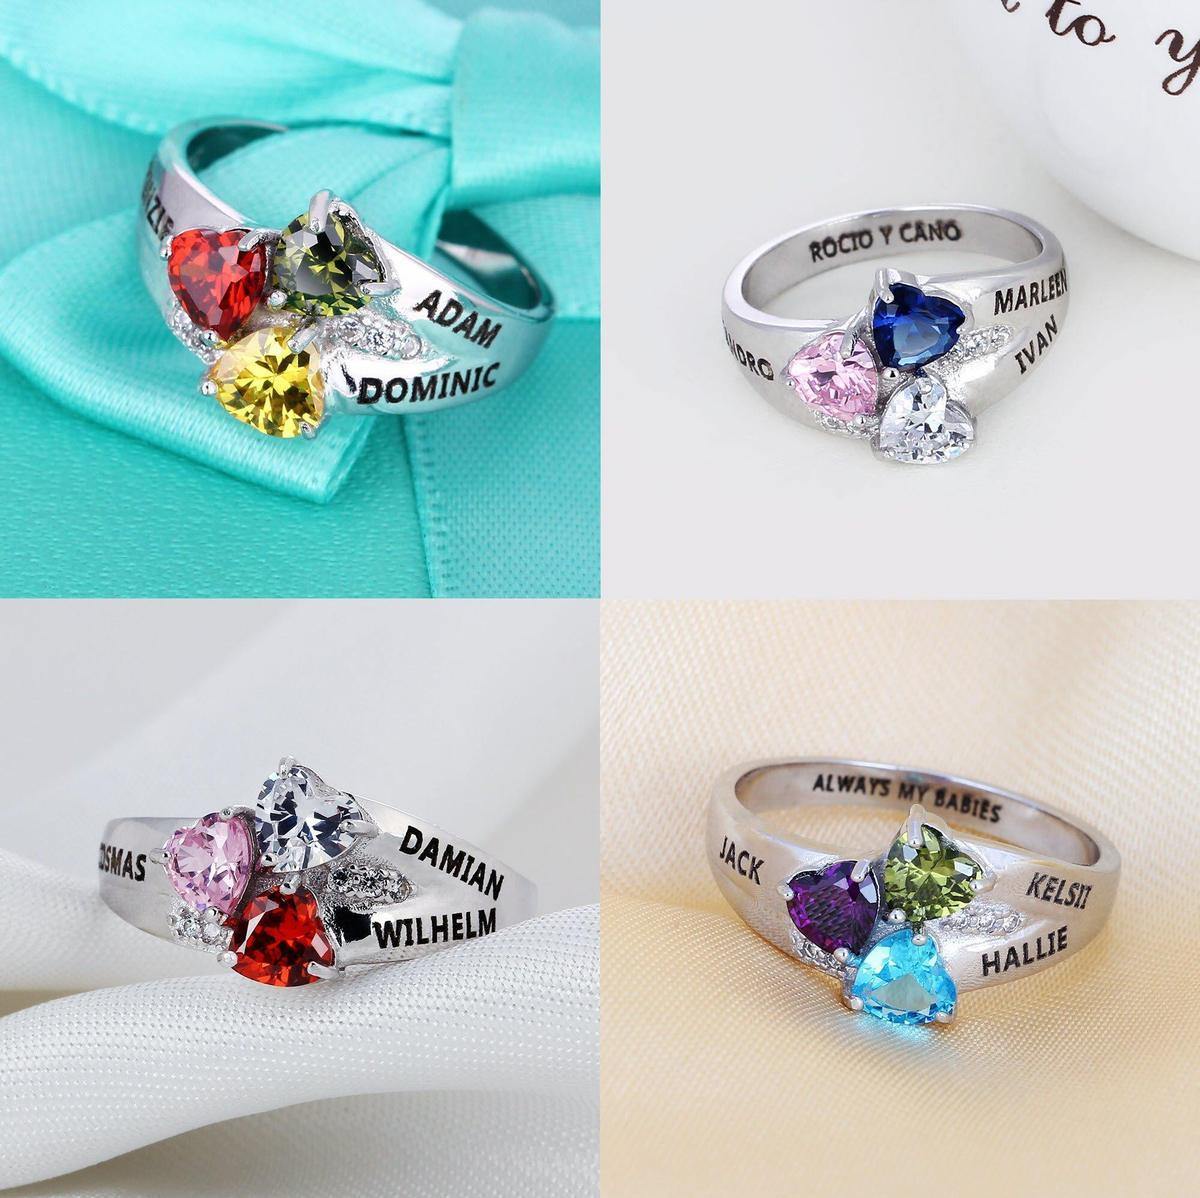 Mother&#39;s Ring with 3 Heart Birthstones_Rings_3 Name, 3 Stone, Accents, Aunt, Family Ring, Featured, Girlfriend, Grandma, Heart, Inside Engraving, Memorial, Mom, Mom Ring, Mother&#39;s Ring, New Baby, Ring, Rings, Size 10, Size 10.5, Size 11, Size 11.5, Size 12, Size 5, Size 5.5, Size 6, Size 6.5, Size 7, Size 7.5, Size 8, Size 8.5, Size 9, Size 9.5, Wife